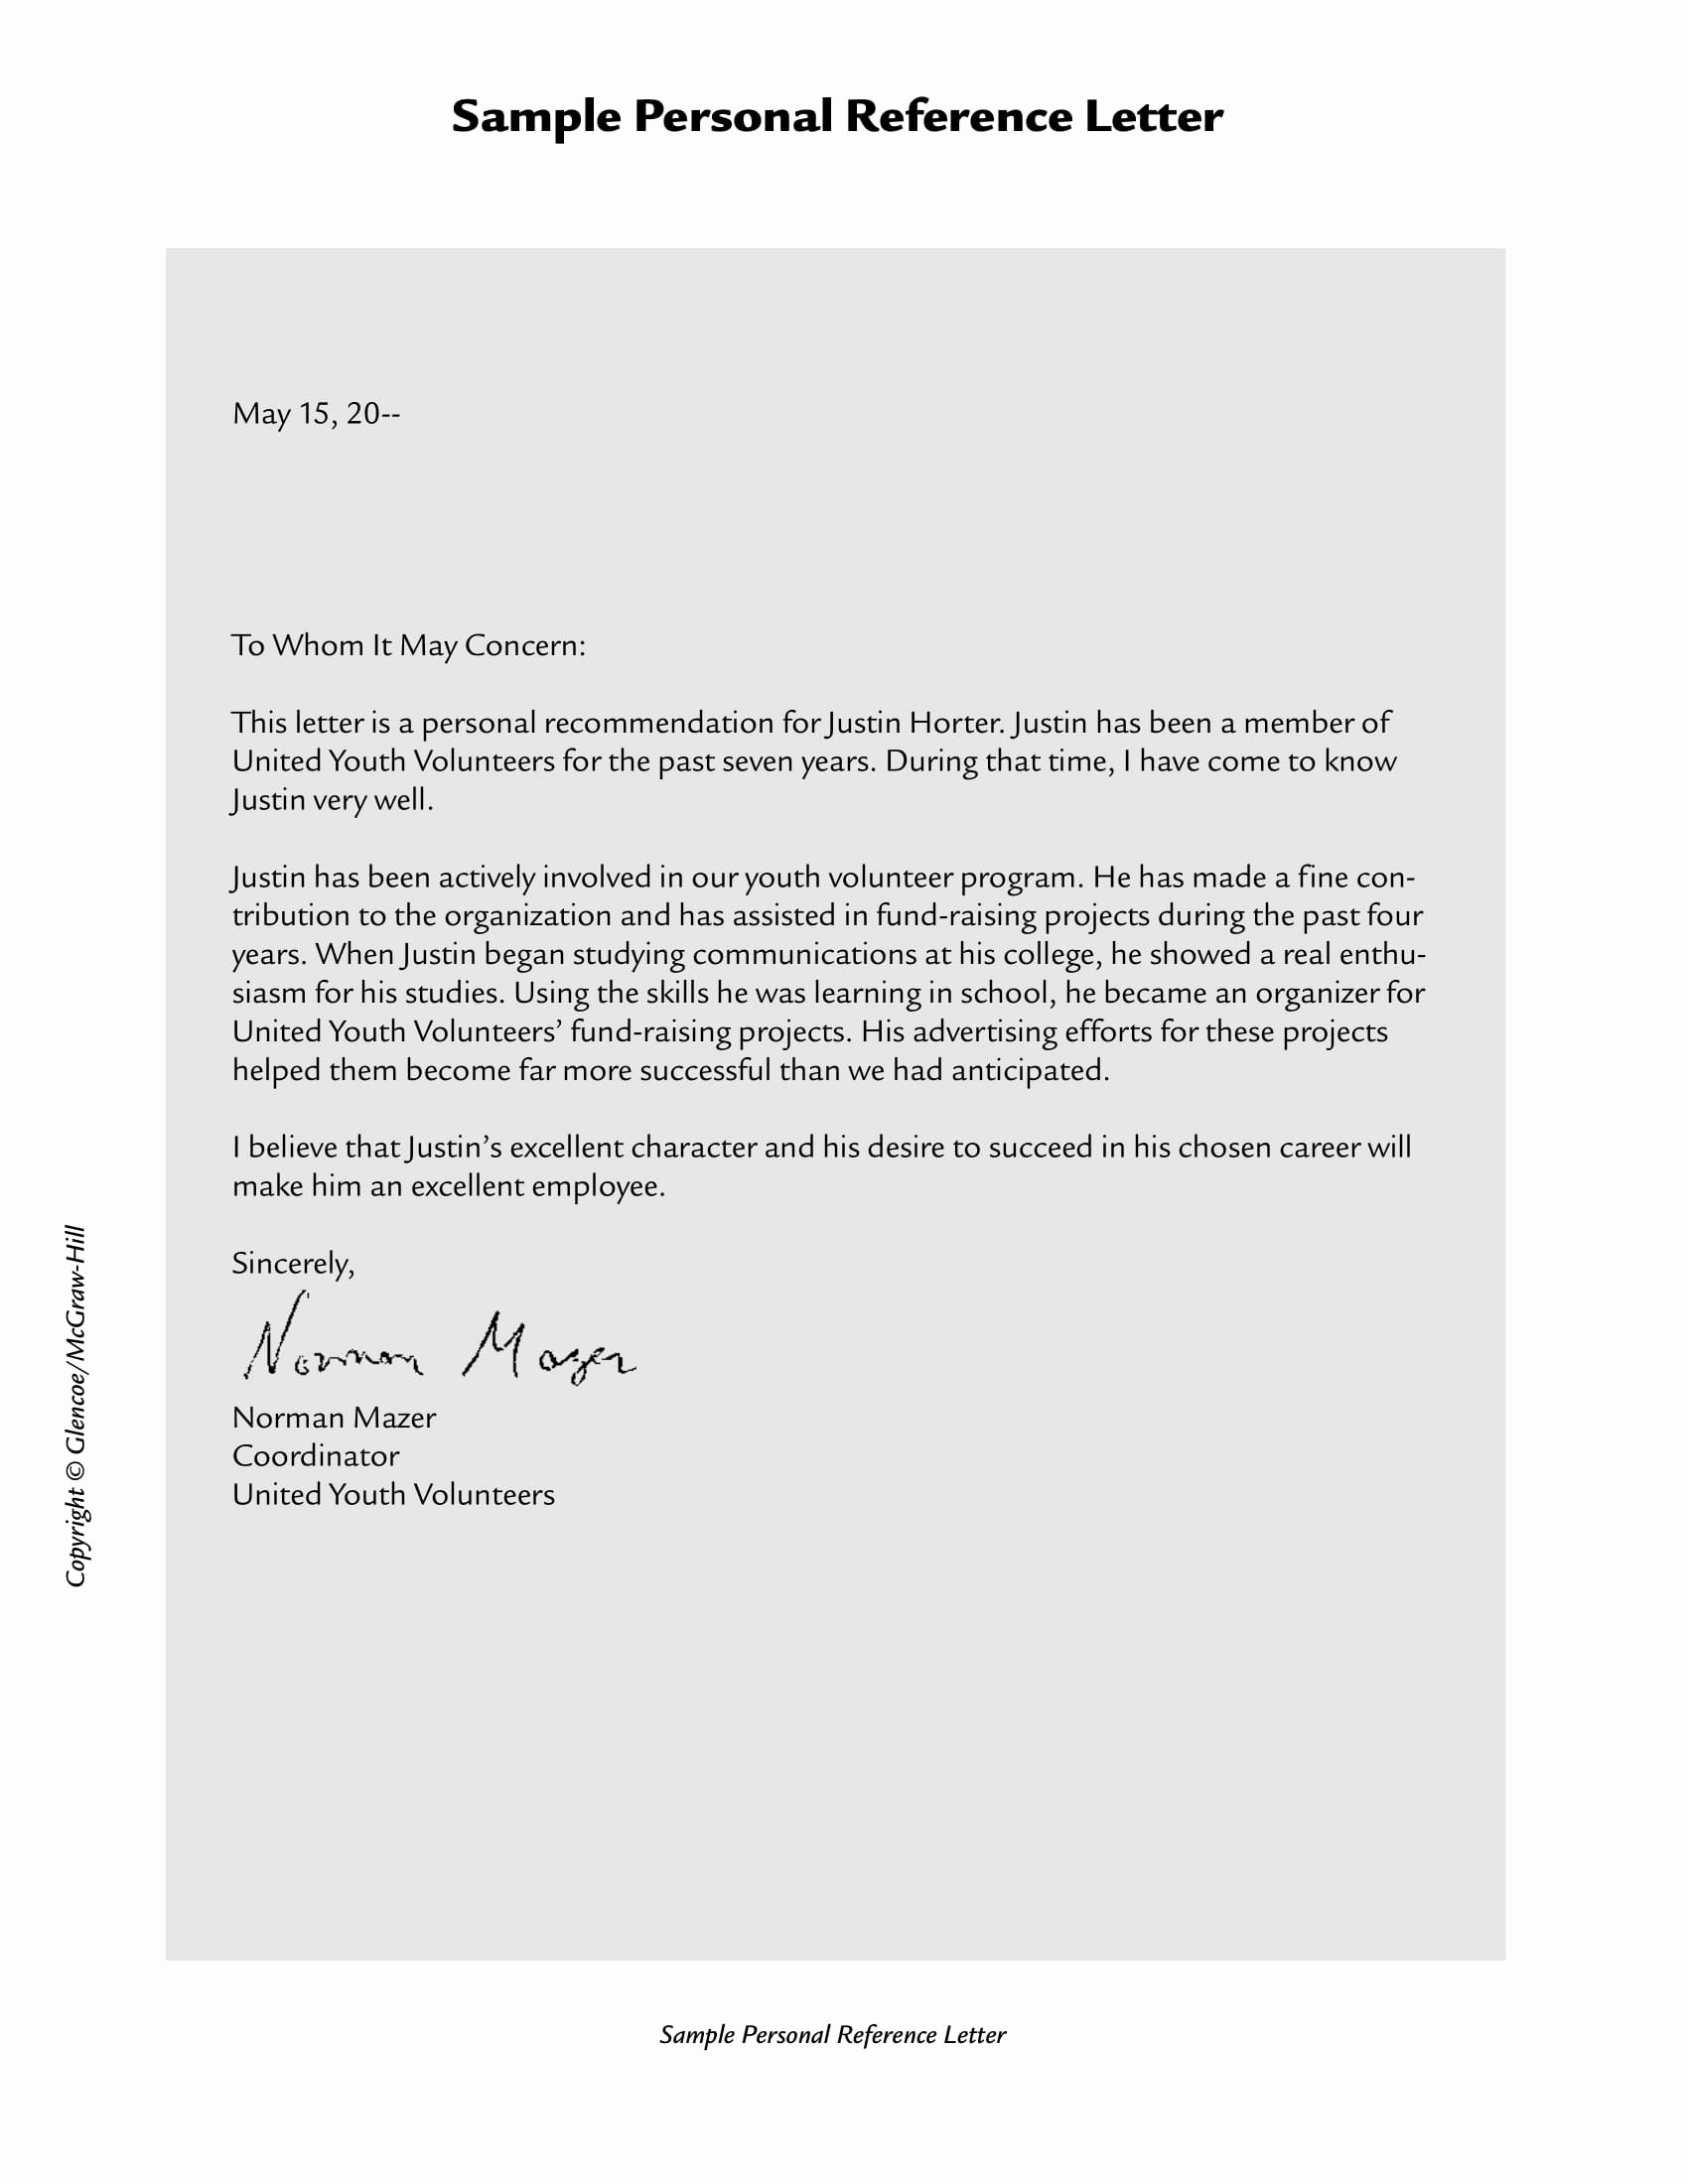 Personal Letters Of Recommendation Samples Luxury 10 Personal Re Mendation Letter Examples Pdf Word